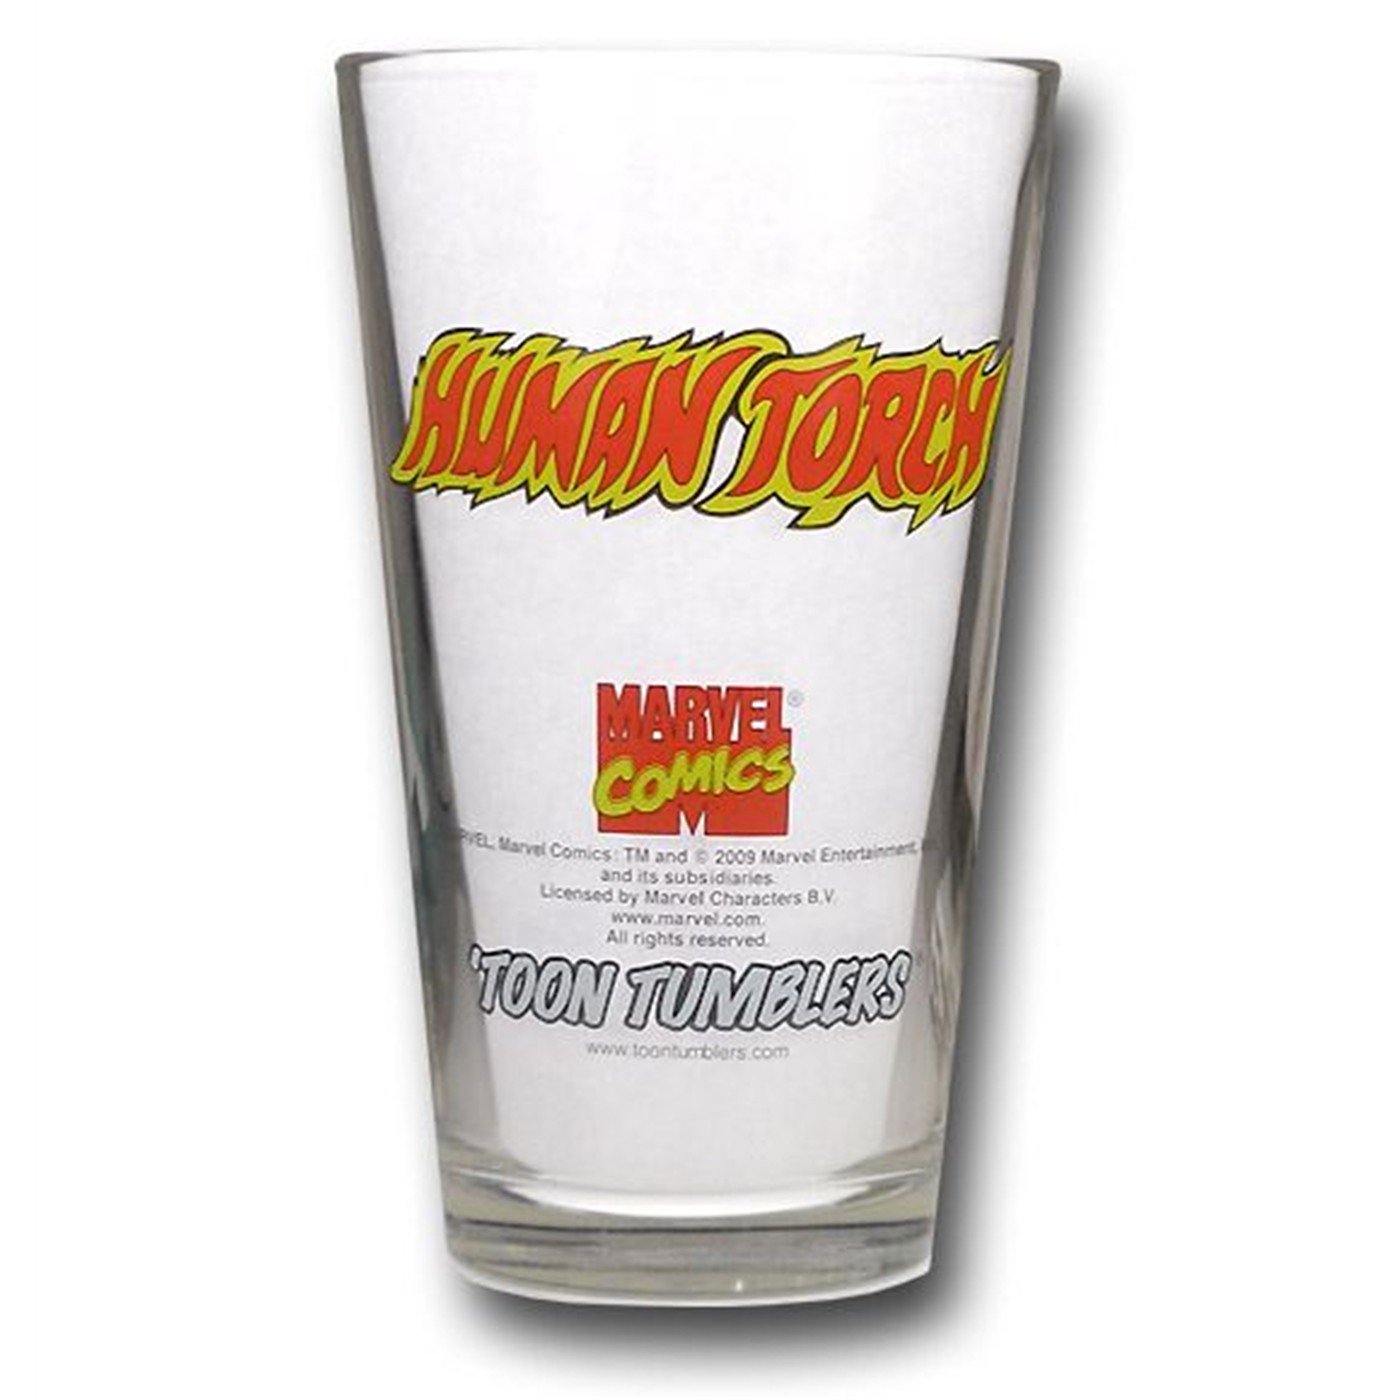 Human Torch Silver Age Pint Glass